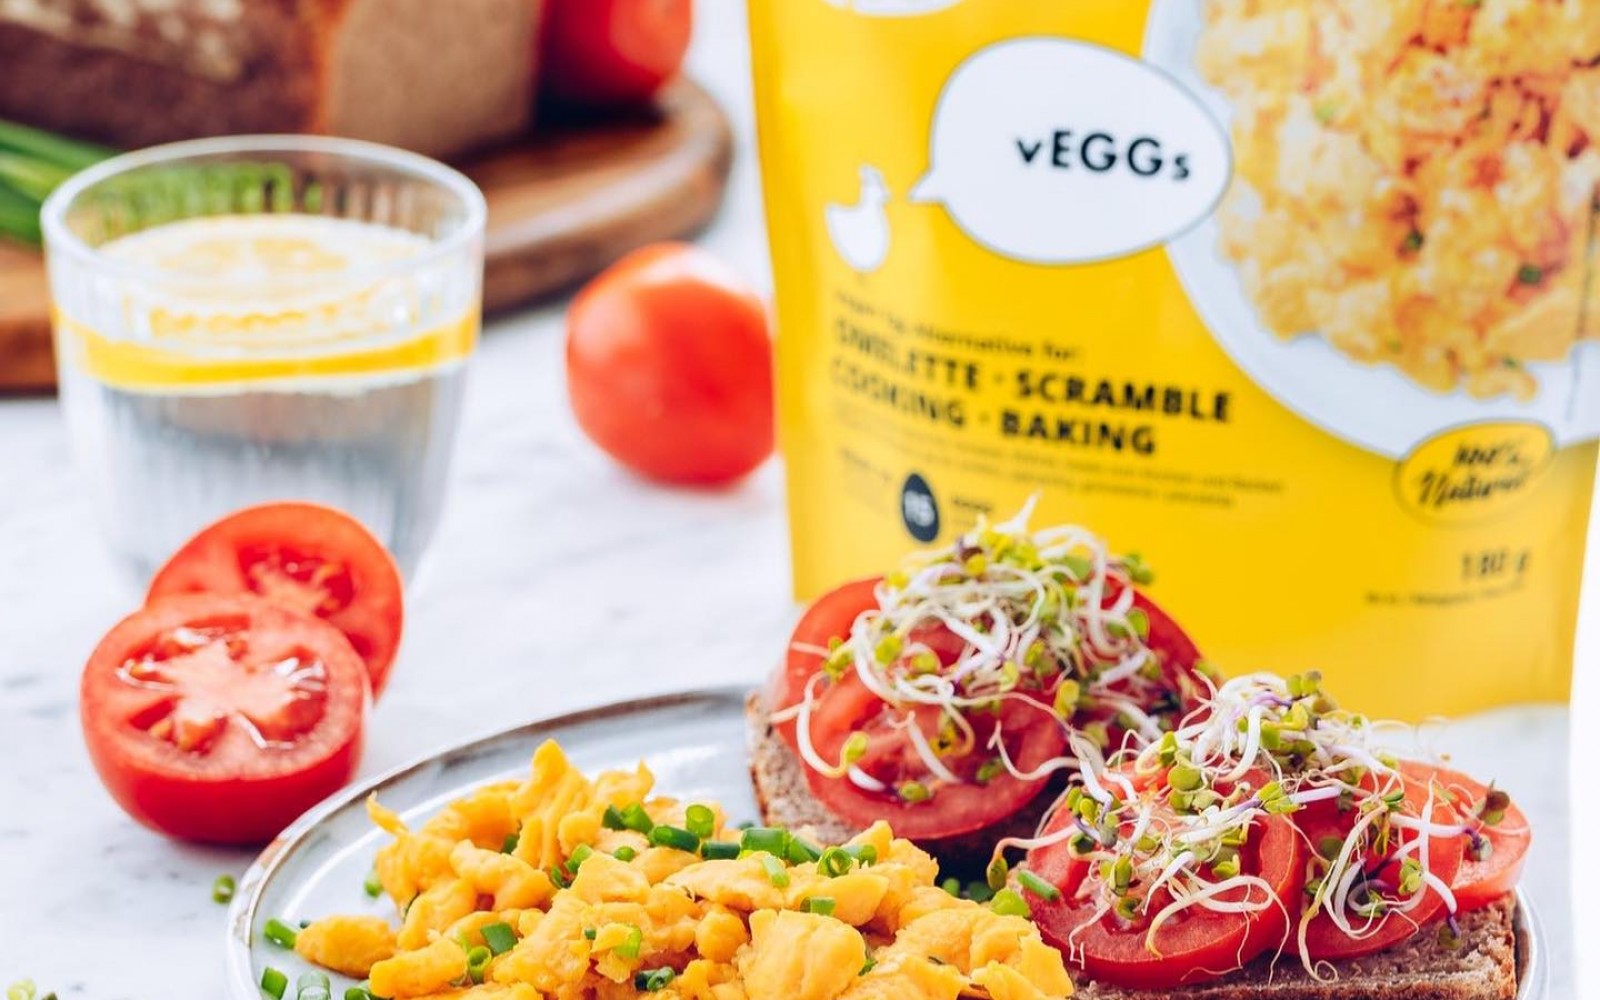 vEEGs is a 100% plant-based egg substitute for baking and cooking